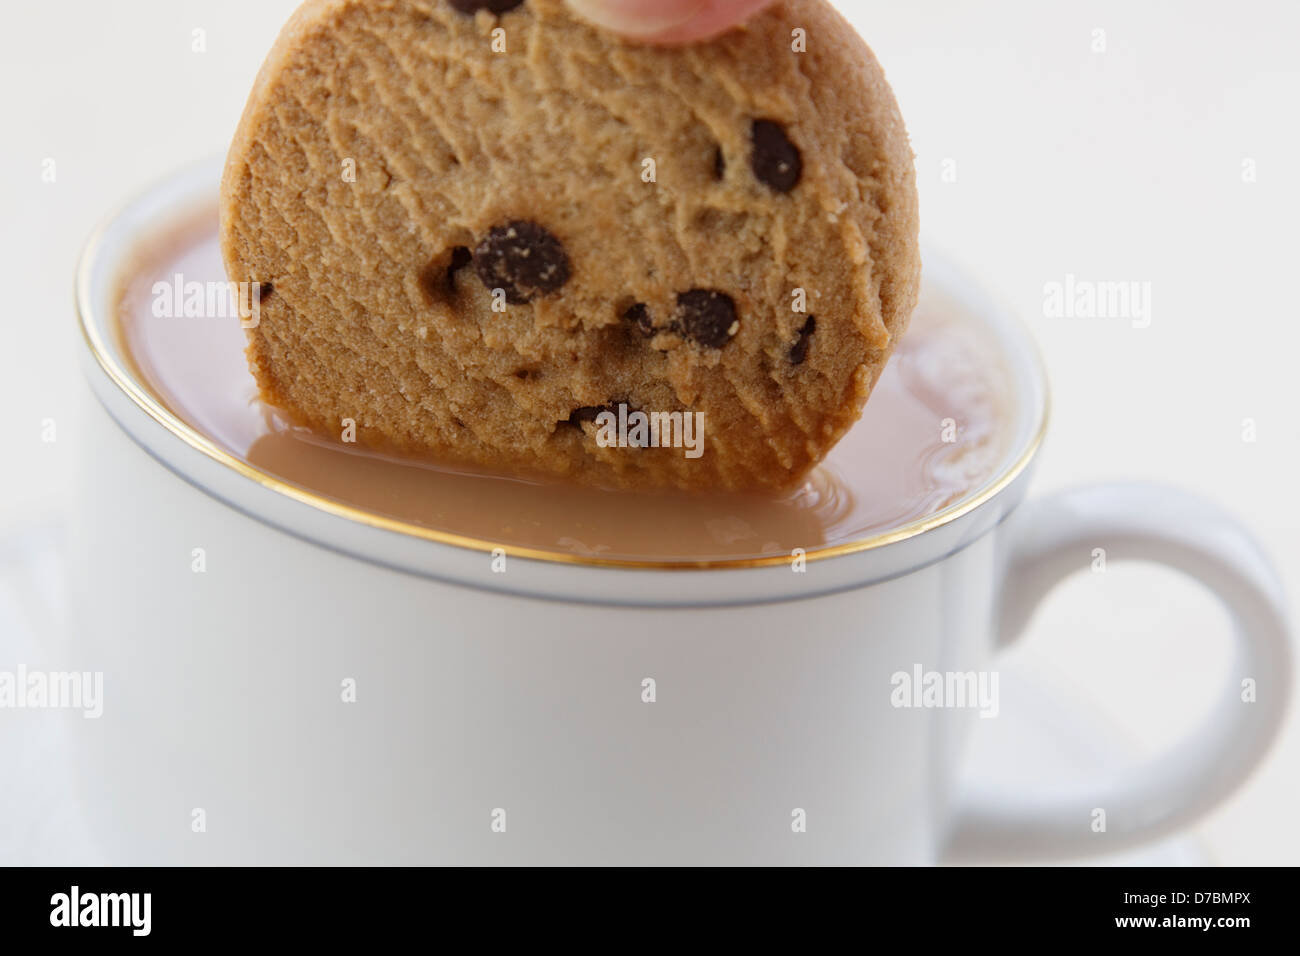 British person dunking a chocolate chip biscuit in to a cup of tea in a white china teacup for tea break. England, UK, Britain Stock Photo